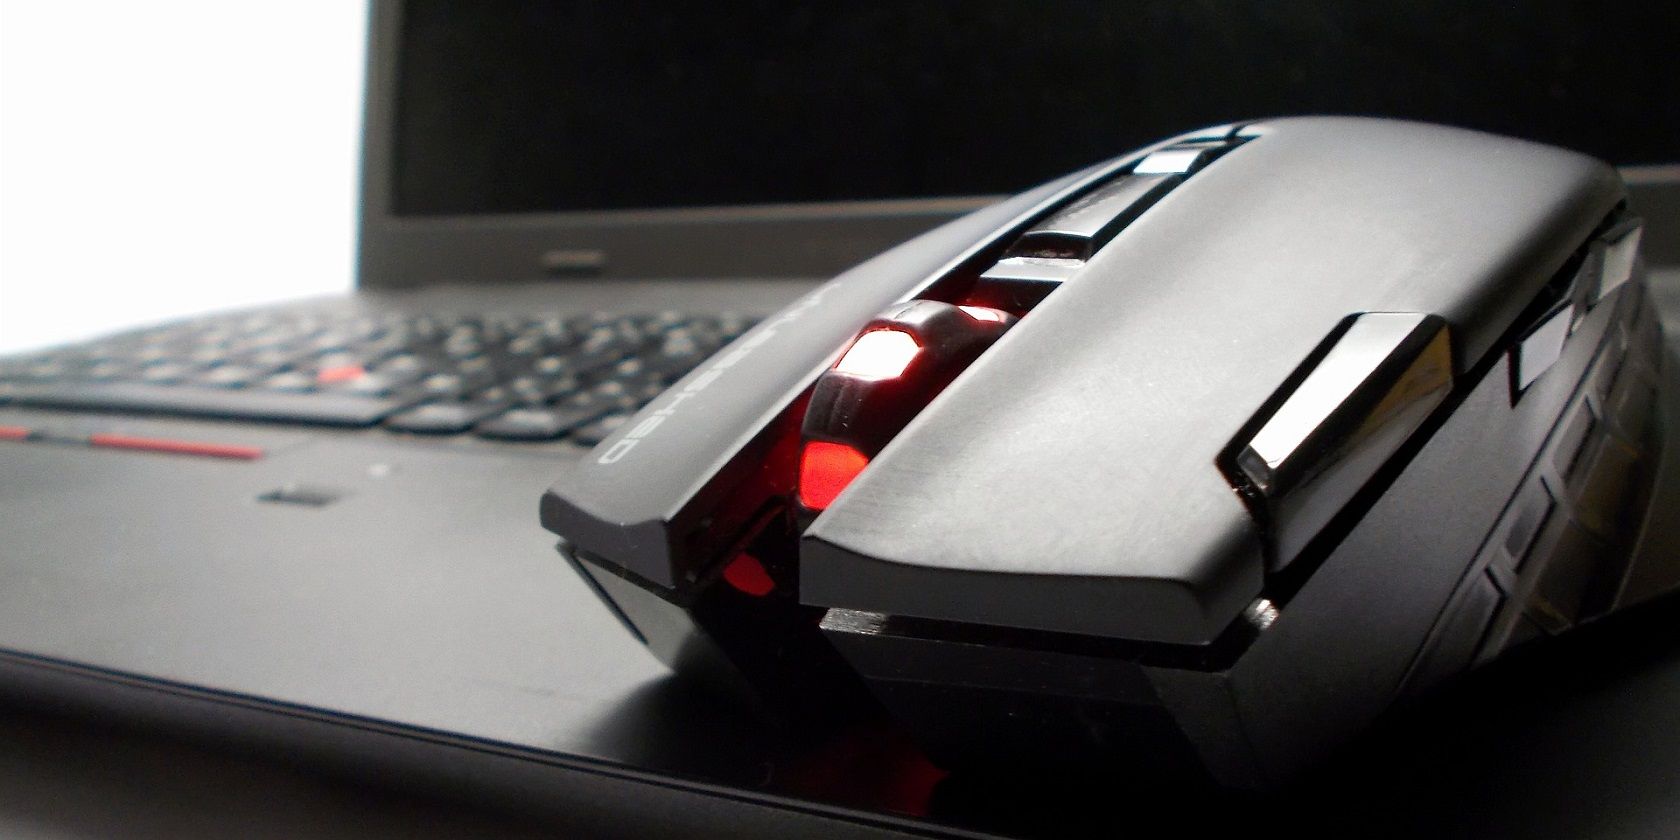 a close up of a pc mouse on laptop